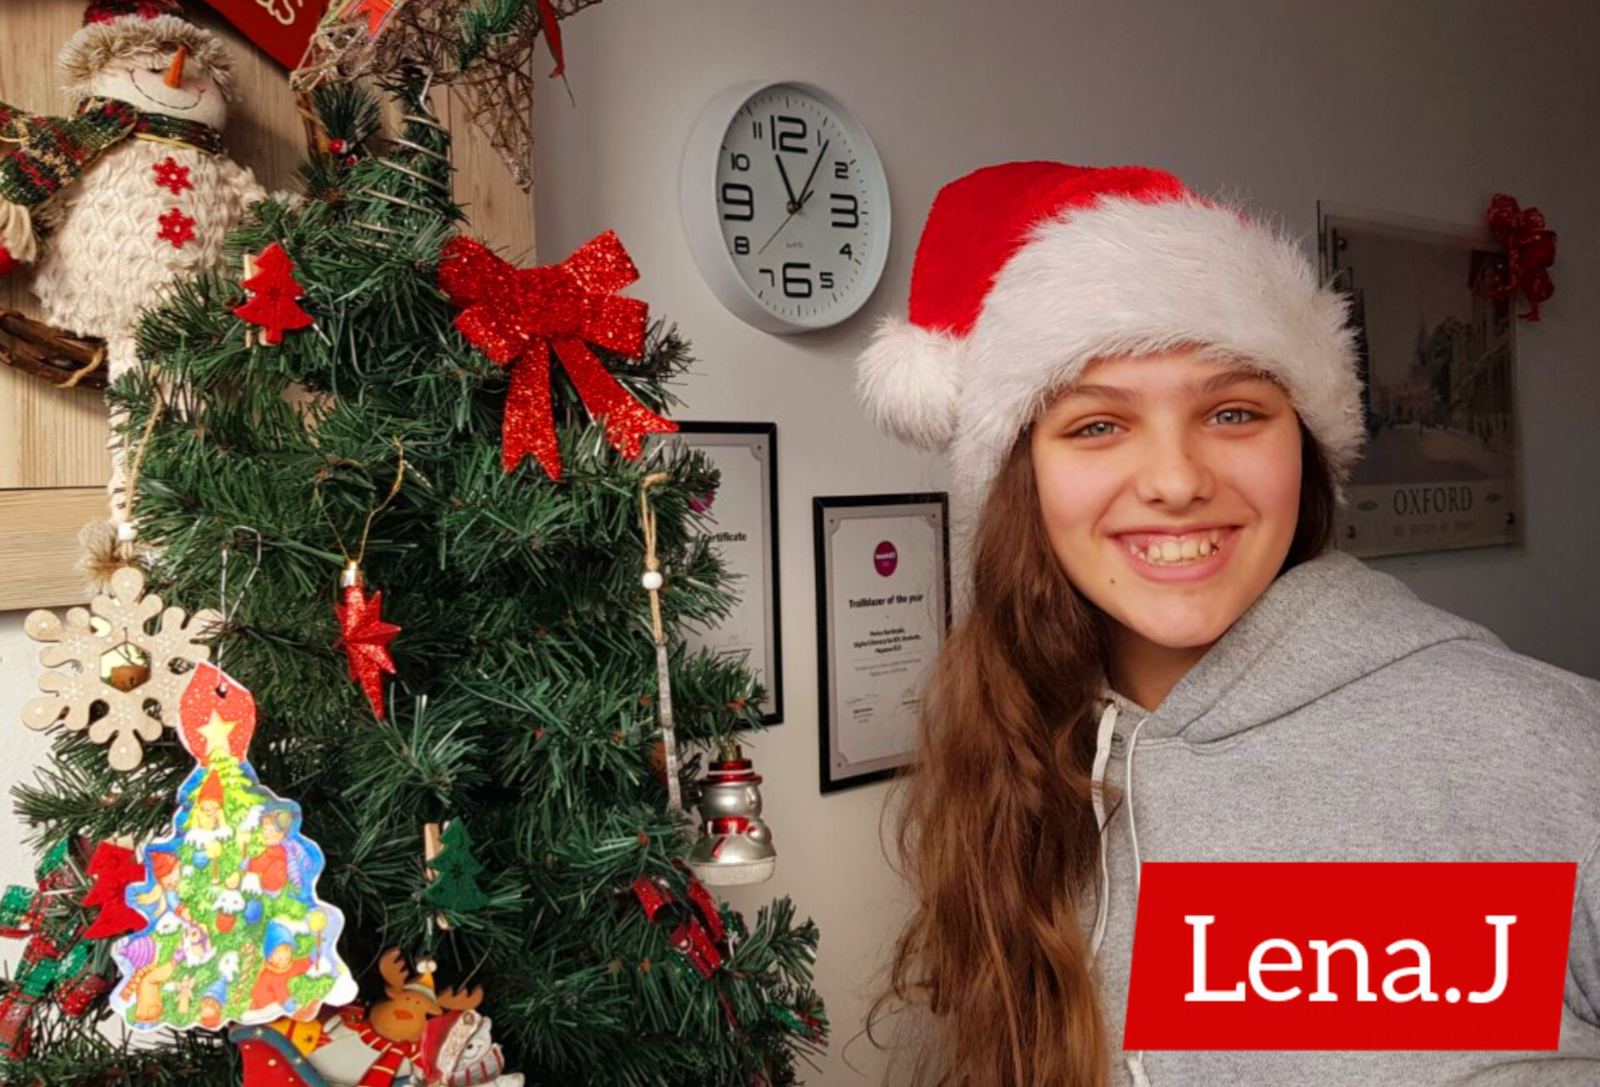 Lena, The 13-Year-Old Young Journalist